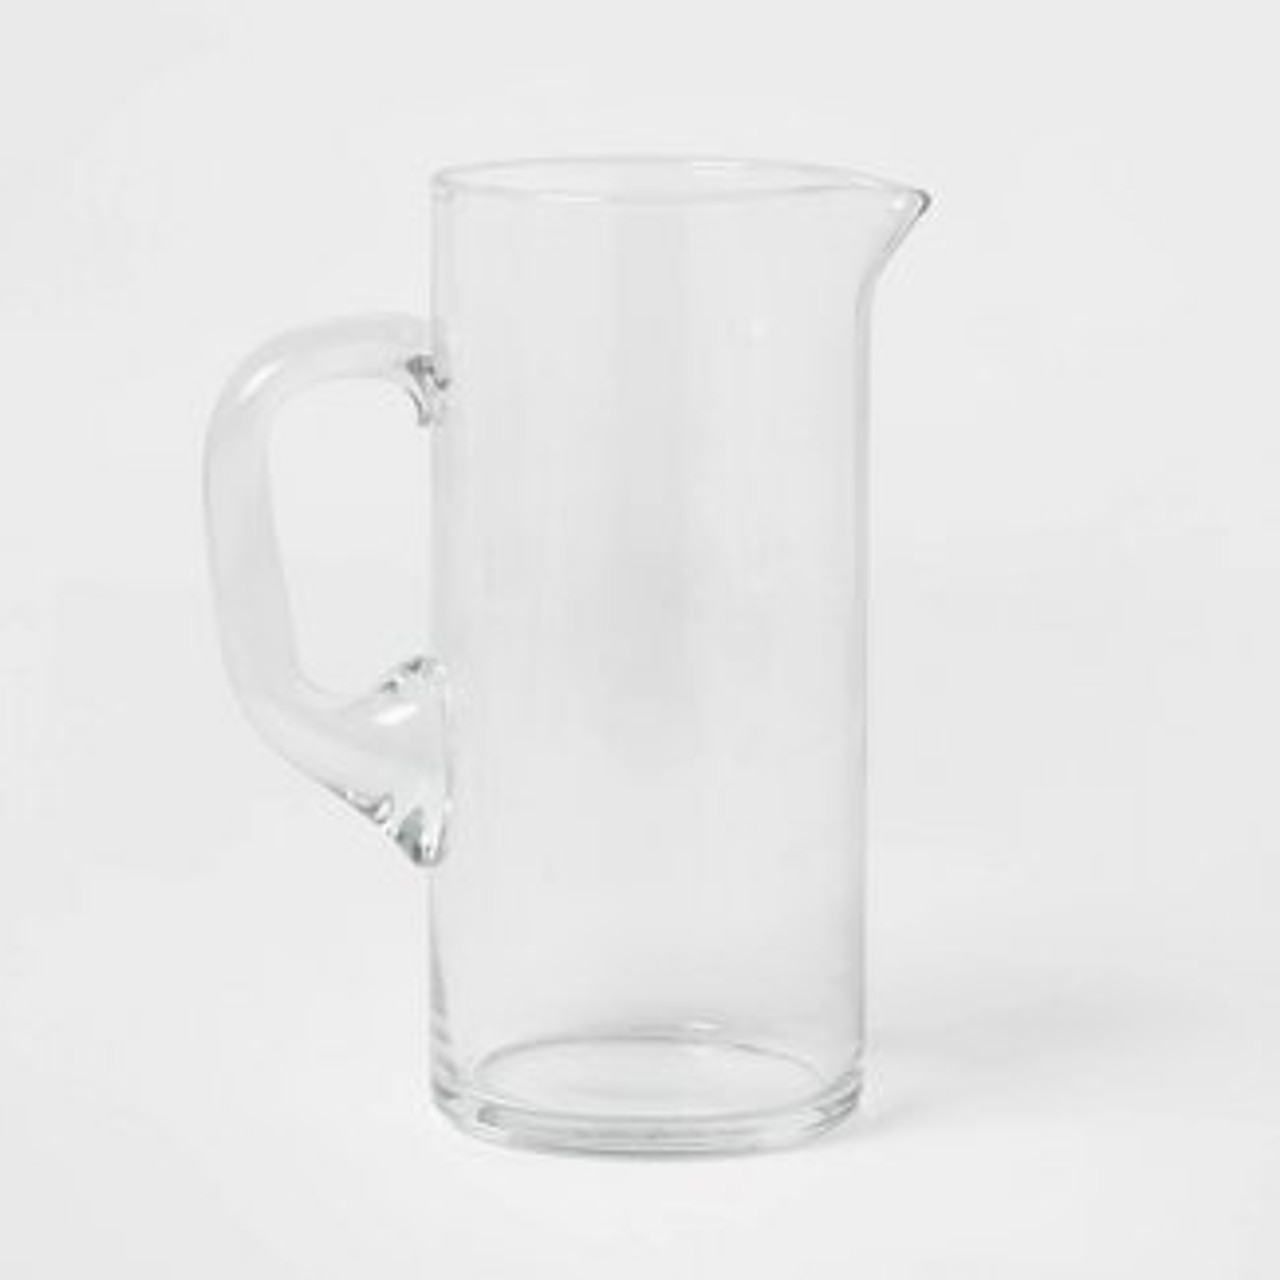 https://cdn11.bigcommerce.com/s-edce4/images/stencil/1280x1280/products/783/2939/glass_water_pitcher__08385.1692795585.jpg?c=2